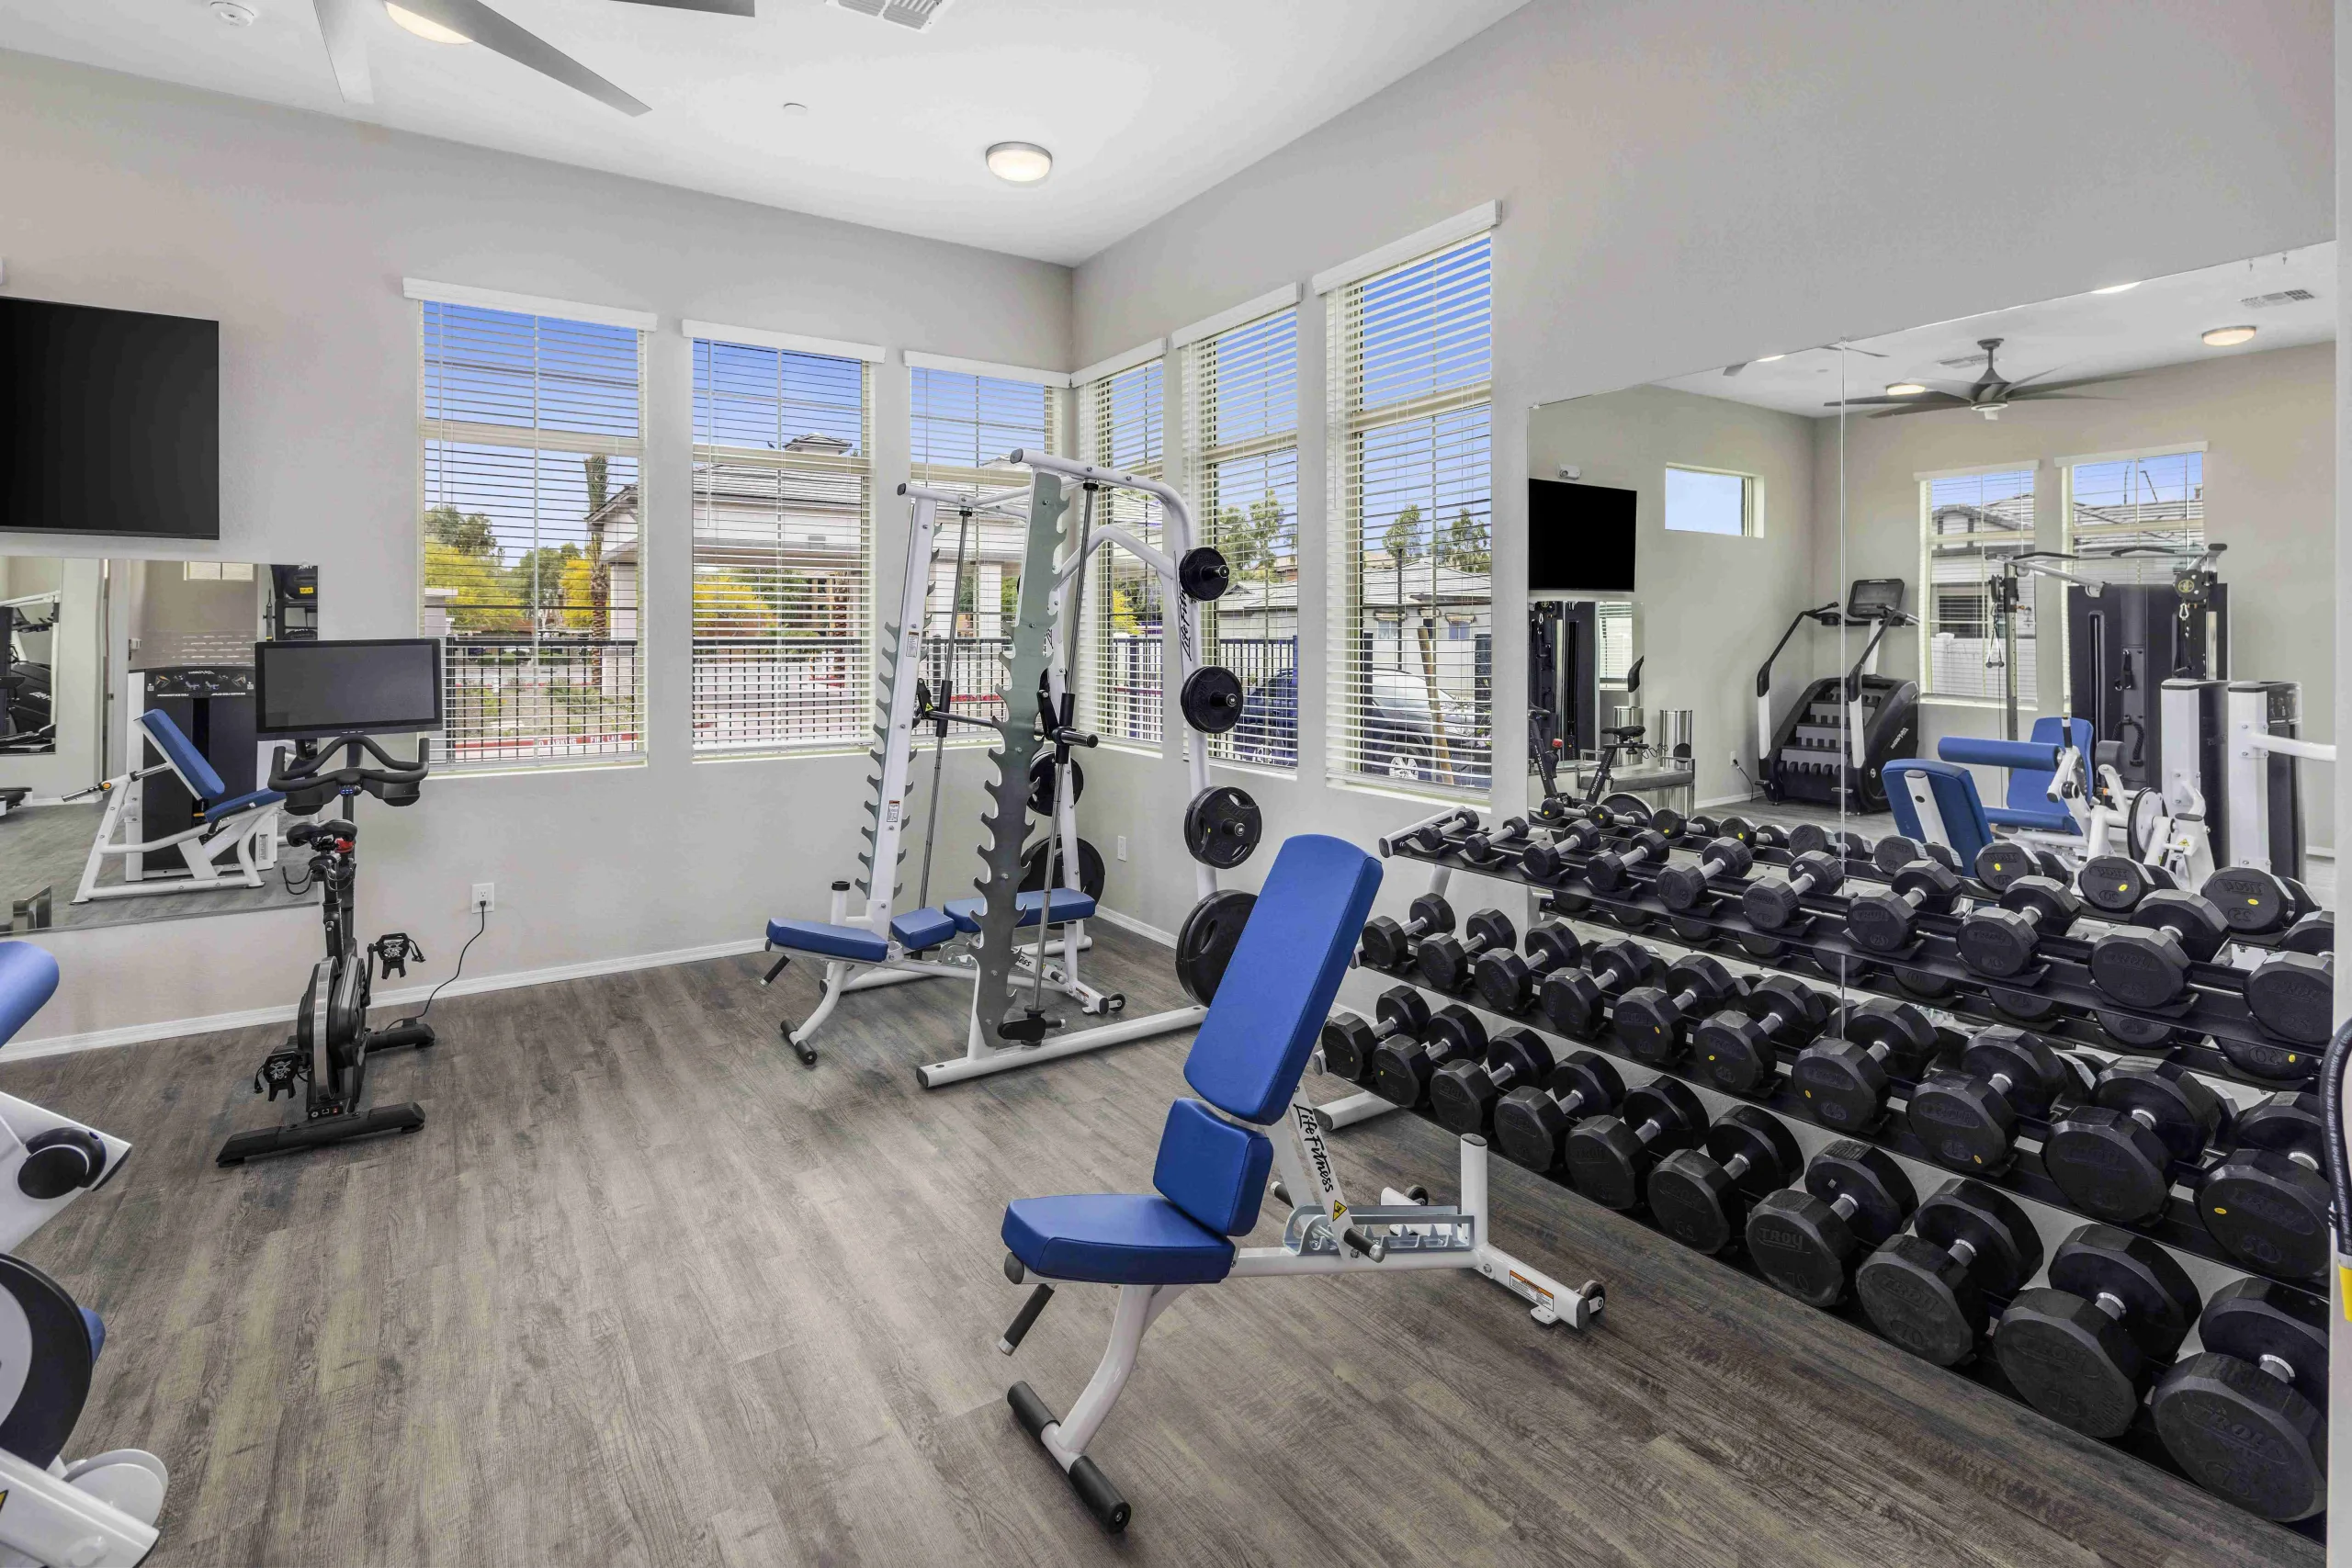 Fitness studio with a weight rack and mirrors, assisted workout machines with adjustable weights, a stair climber, bench, elliptical, bike, and treadmill.